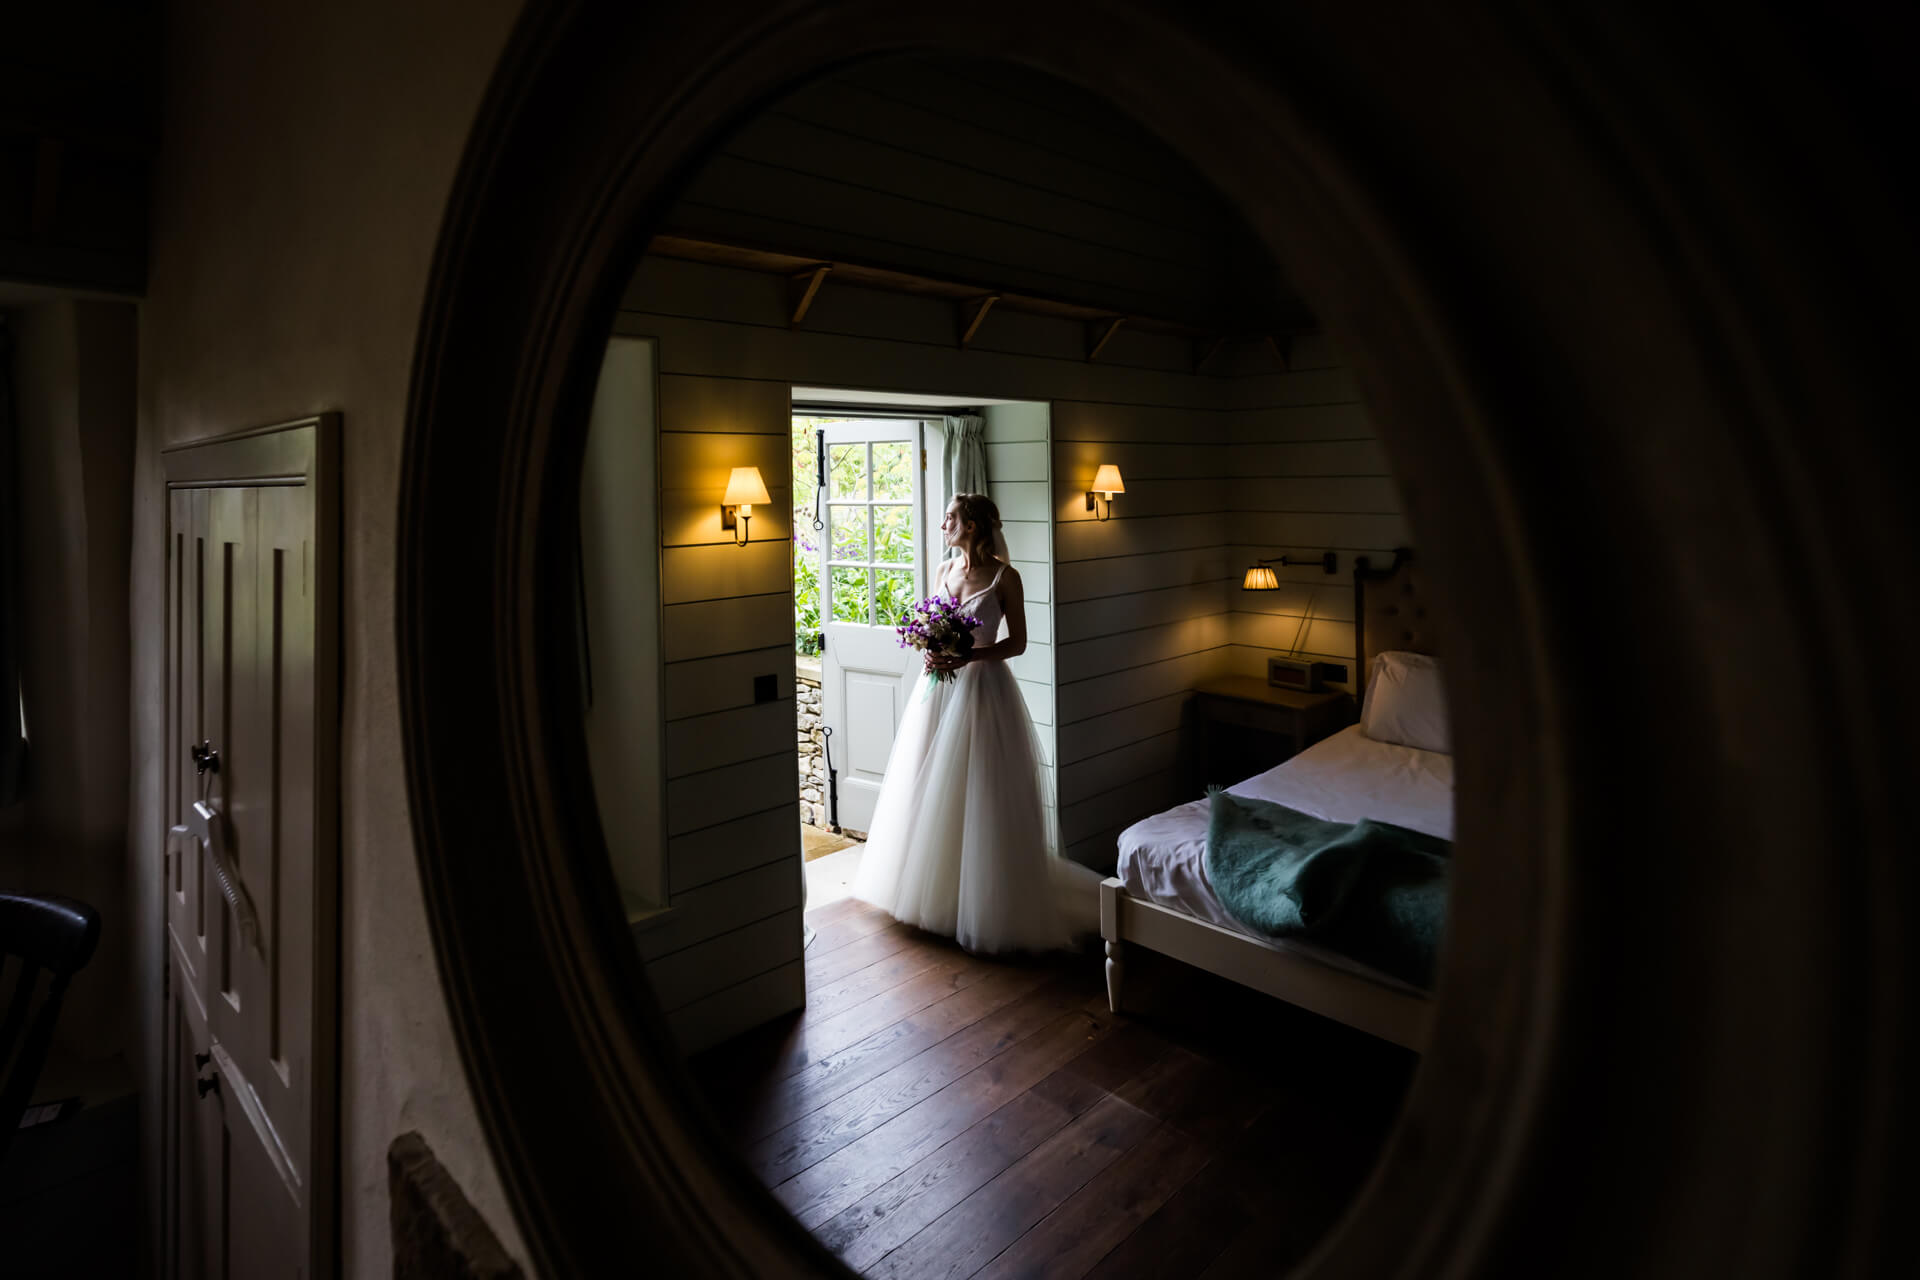 reflection of the bride in a mirror as she looks out of the doorway